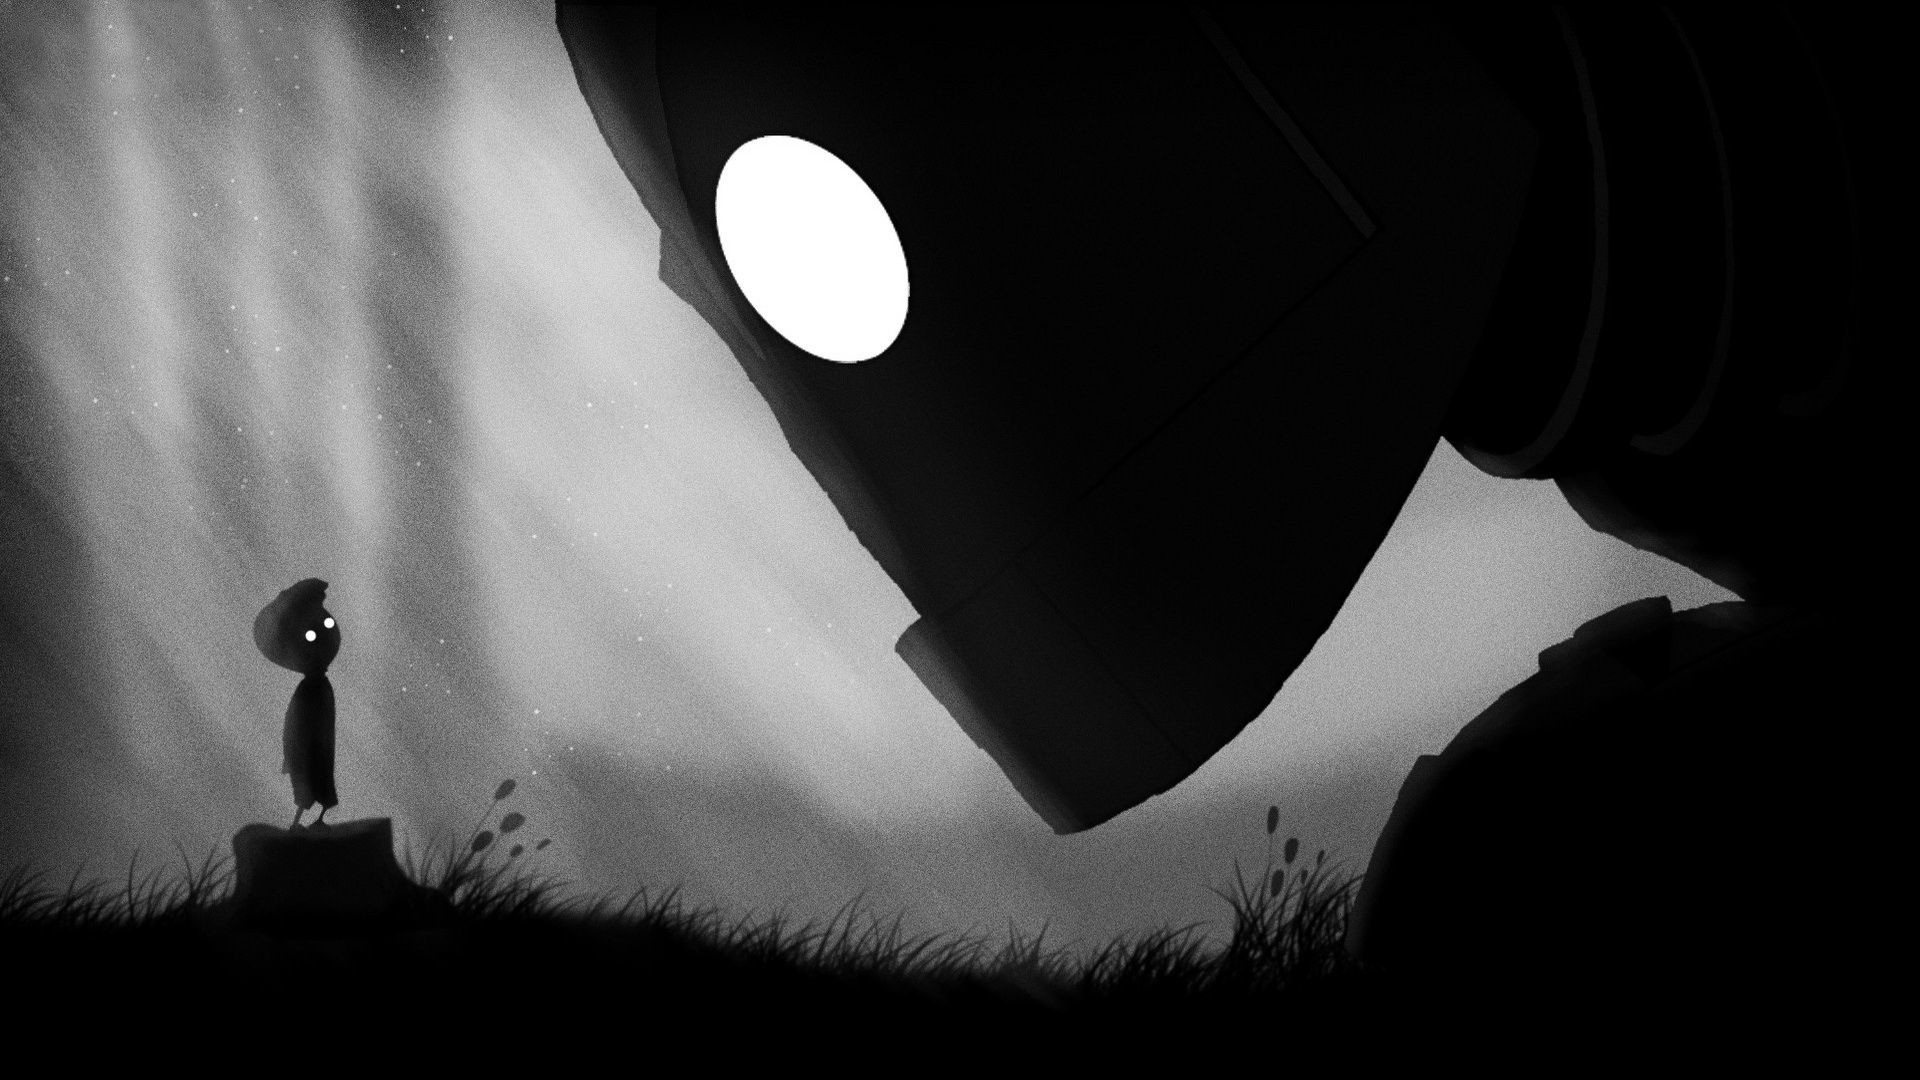 1920x1080 Limbo and Iron Giant Computer Wallpapers, Desktop Backgrounds .